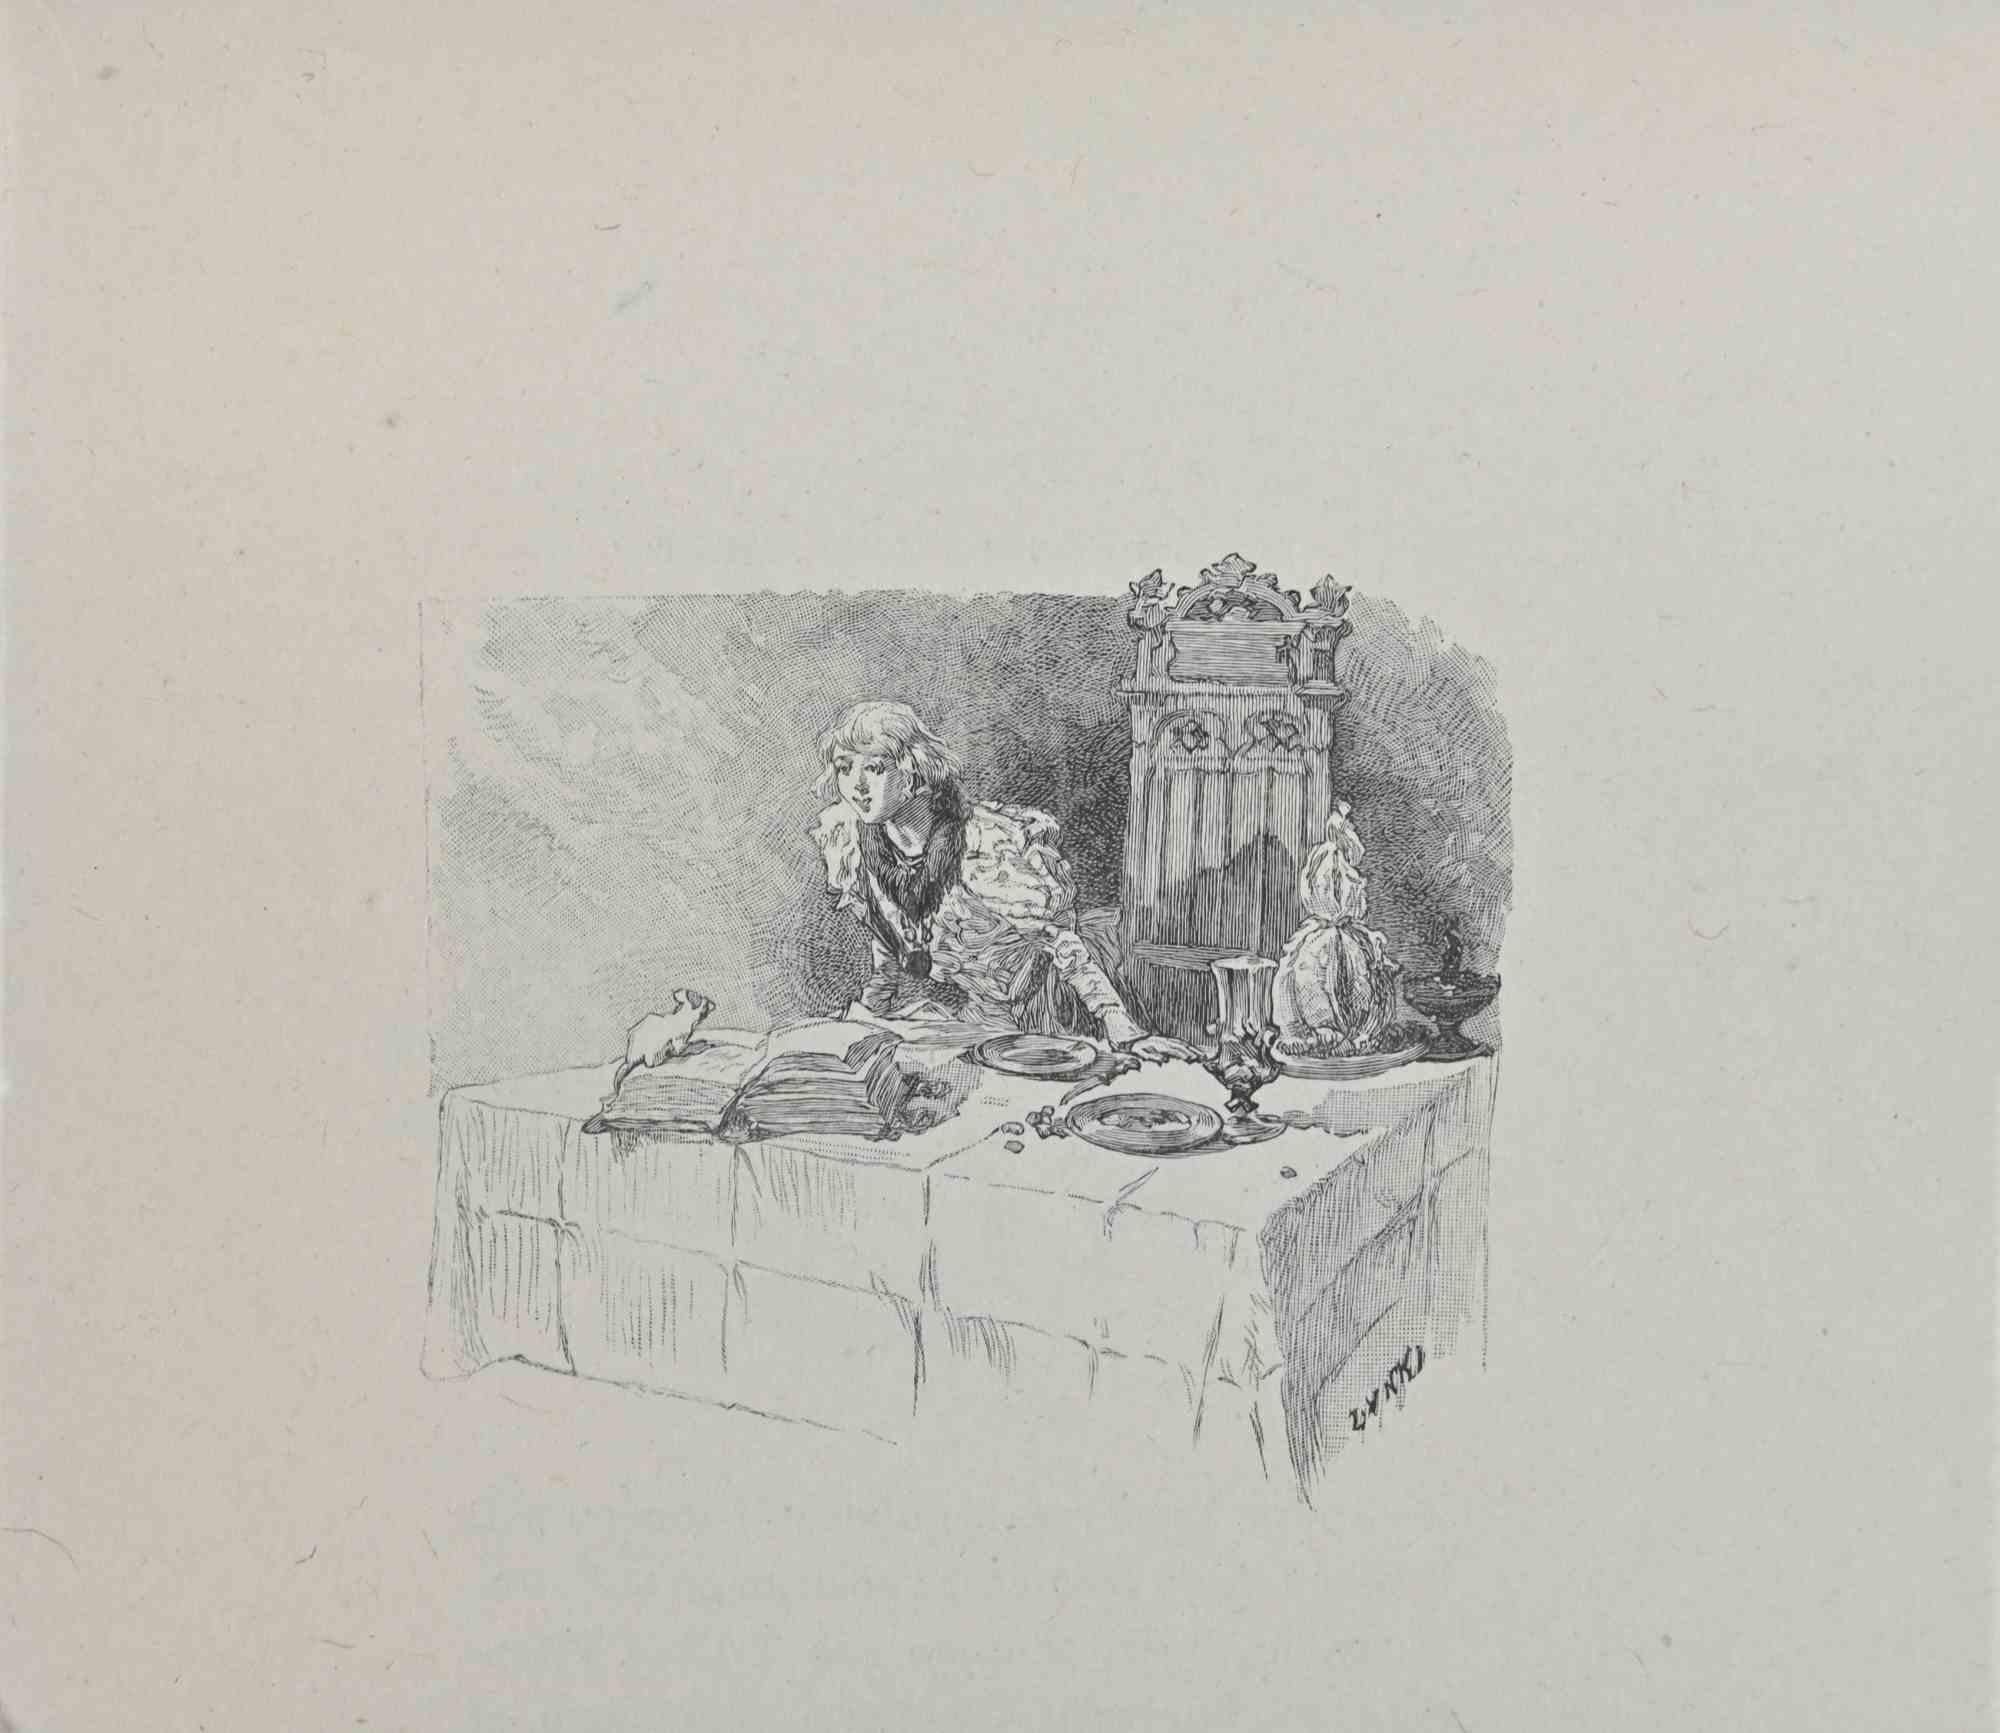 The Girl and Mouse is a lithograph on paper realized by Hégésippe Moreau in 1838.

The artwork is in good conditions.

Hégésippe Moreau (1810-1838) was a French lyric poet. The romantic myth was solidified by the publication of his complete